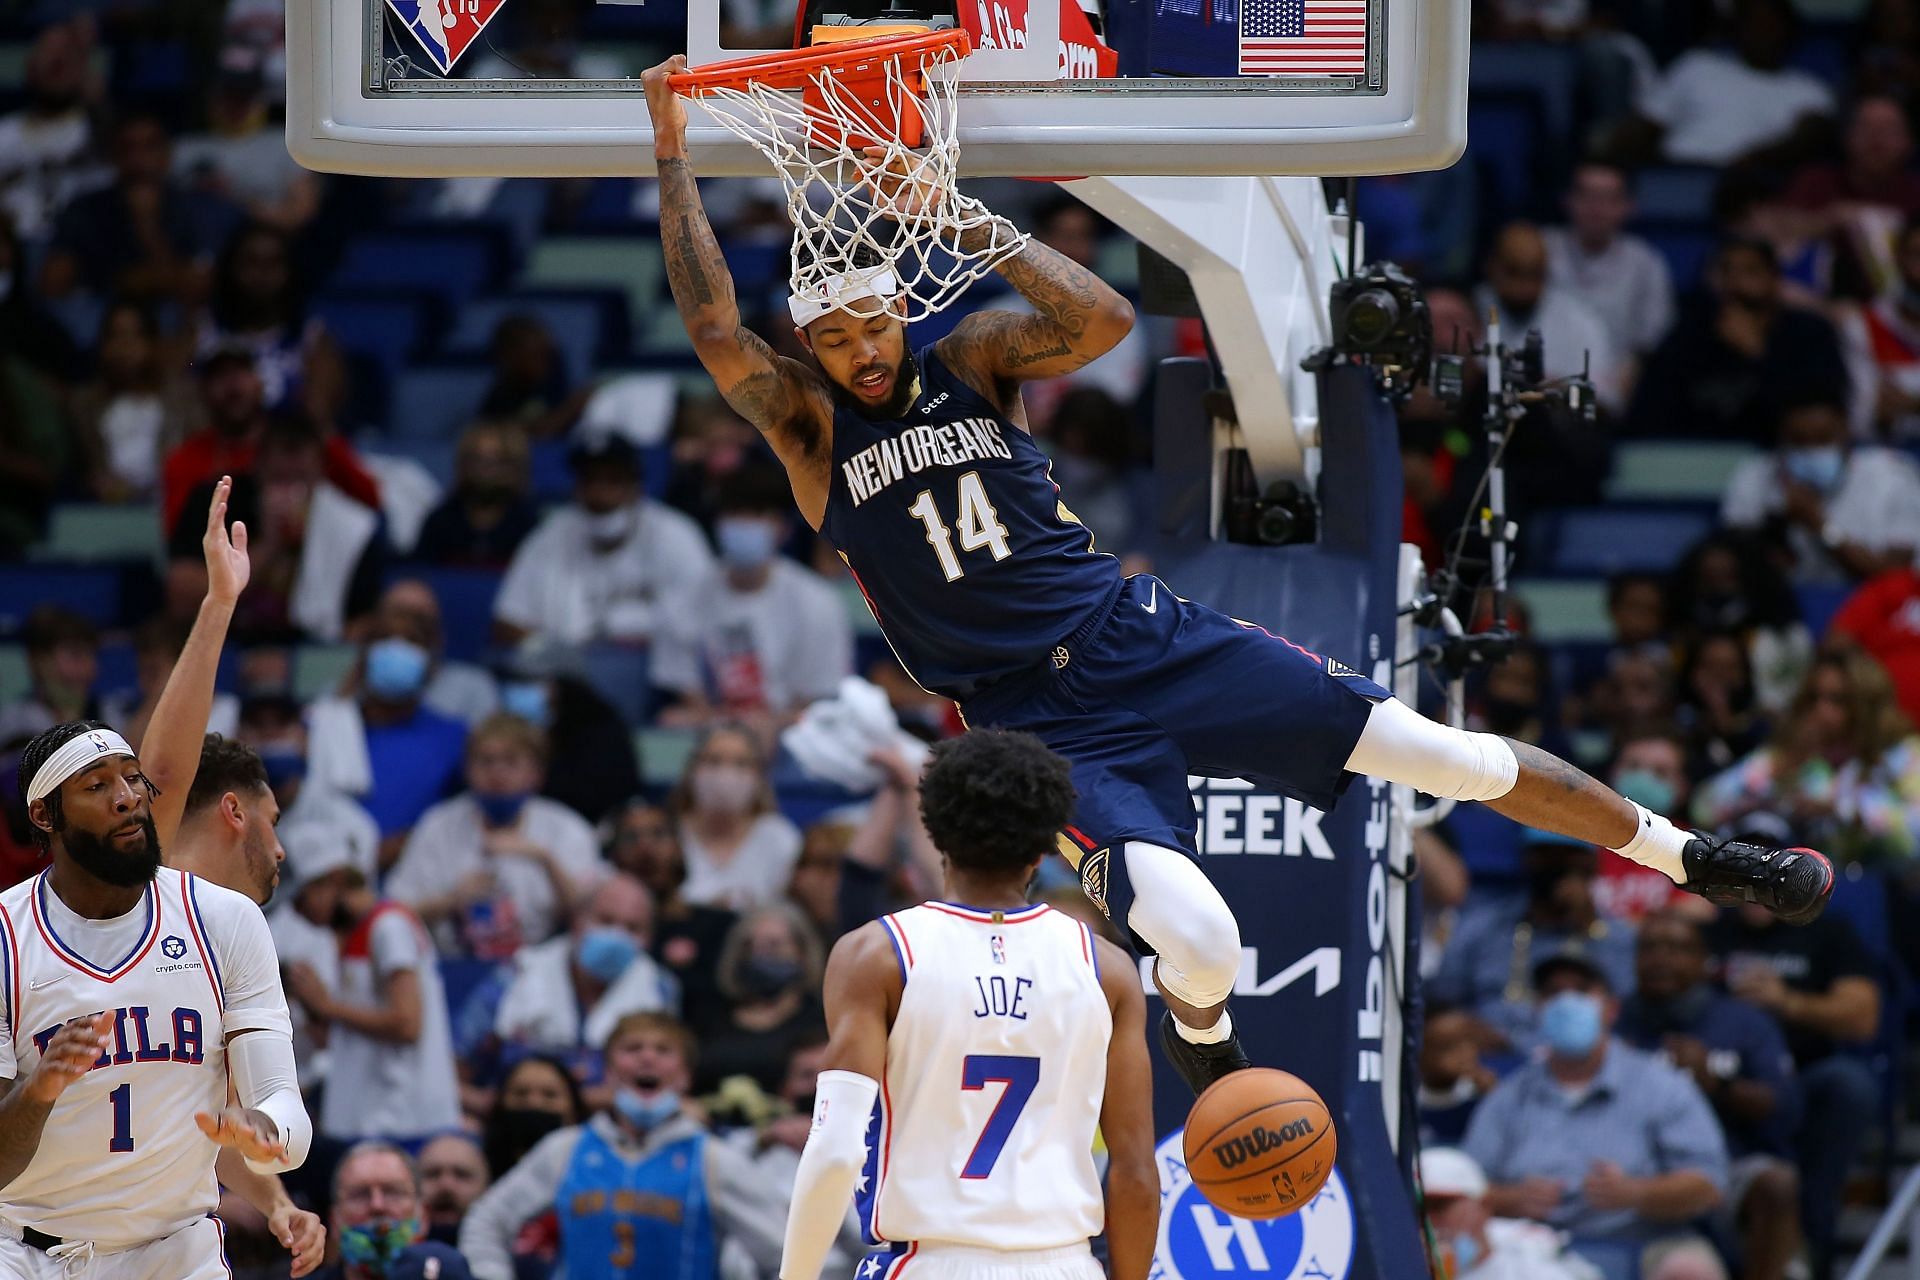 Brandon Ingram #14 of the New Orleans Pelicans dunks as Isaiah Joe #7 of the Philadelphia 76ers and Andre Drummond #1 defend during the second half at the Smoothie King Center on October 20, 2021 in New Orleans, Louisiana.